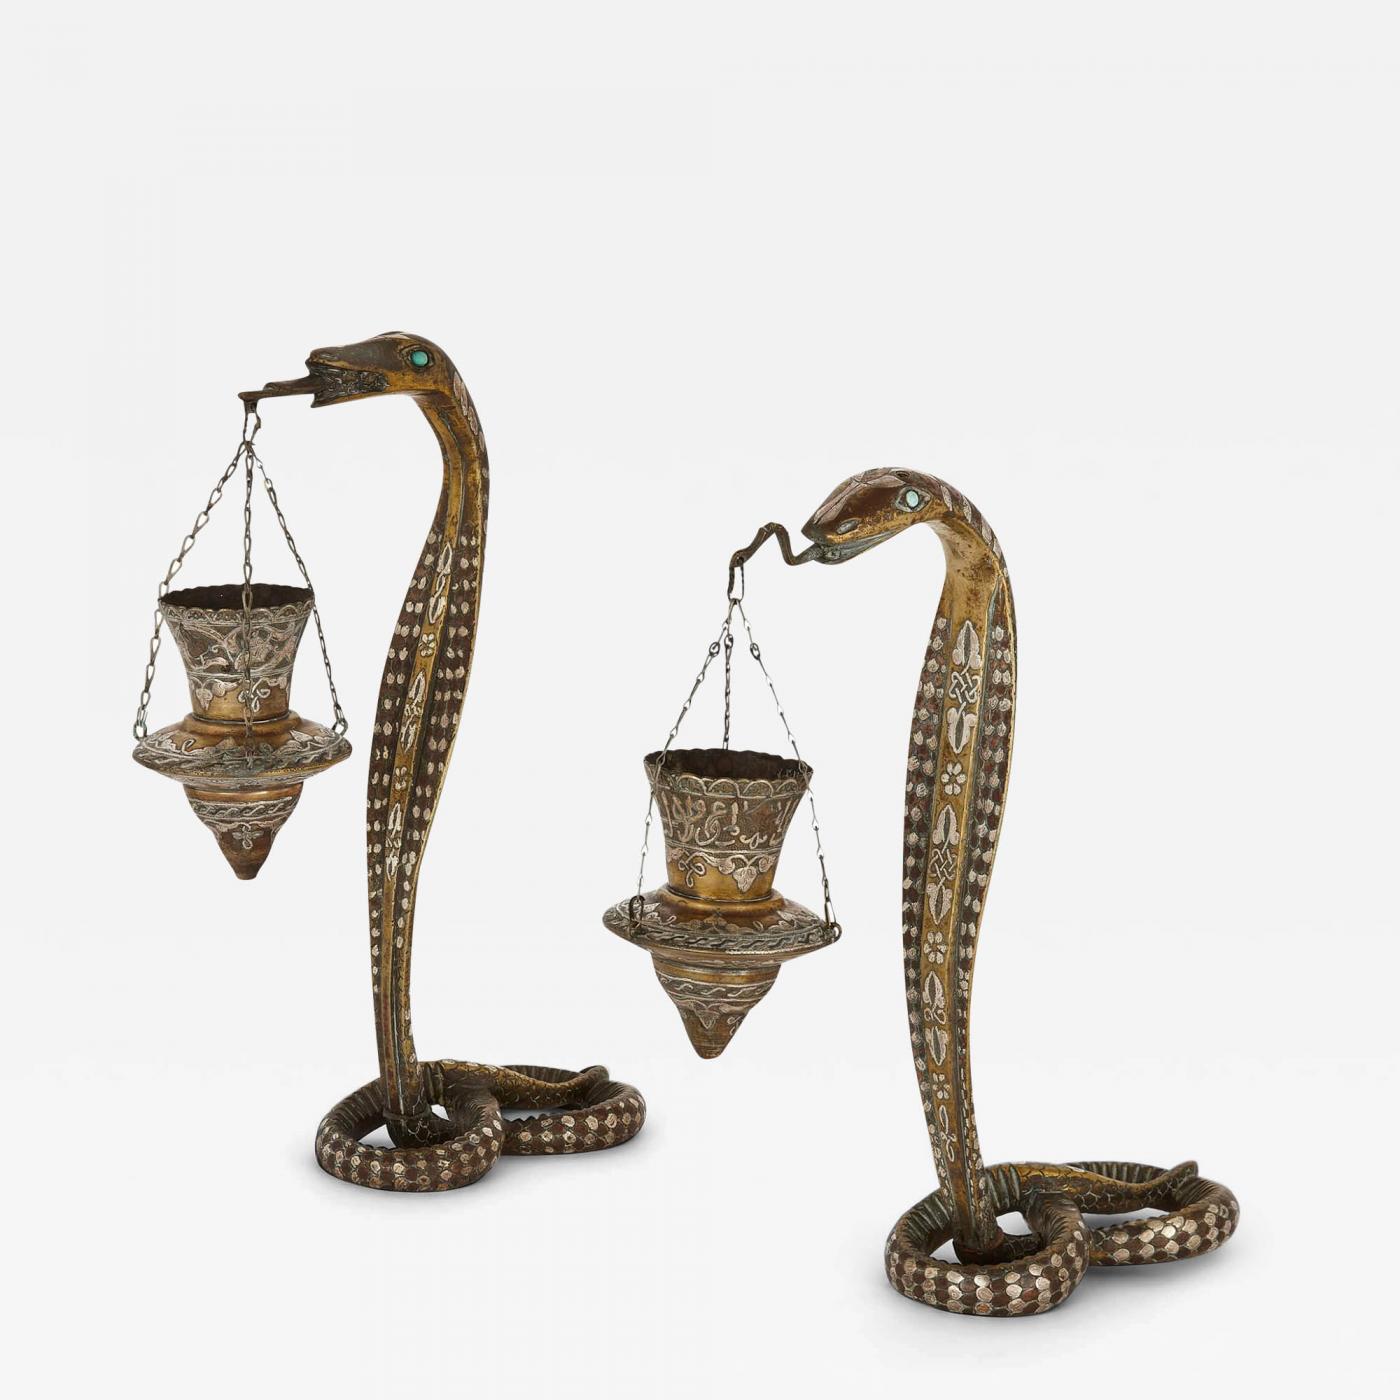 Vintage Brass Cobra Candle Holders, Pair of Snake Candle Sticks